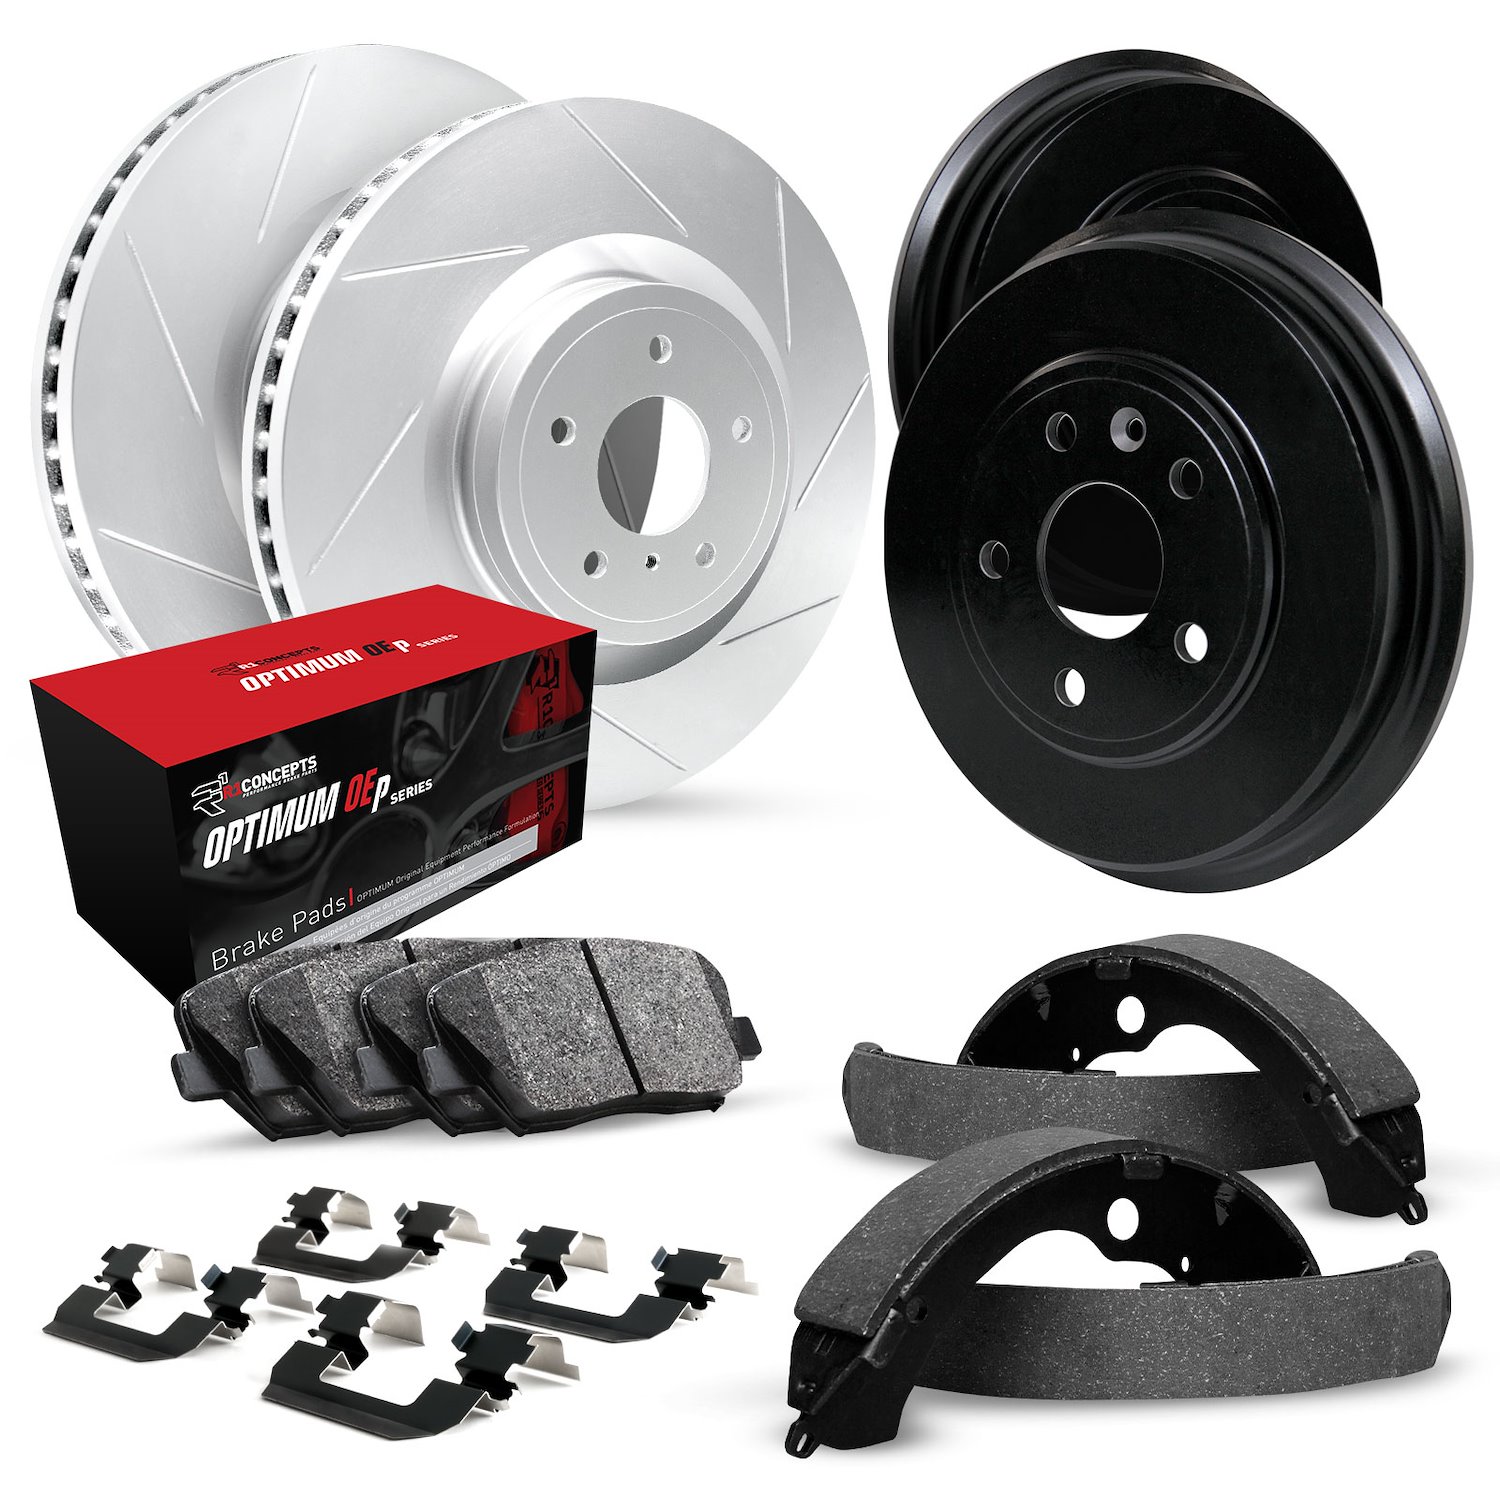 GEO-Carbon Slotted Brake Rotor & Drum Set w/Optimum OE Pads, Shoes, & Hardware, 1993-1993 GM, Position: Front & Rear